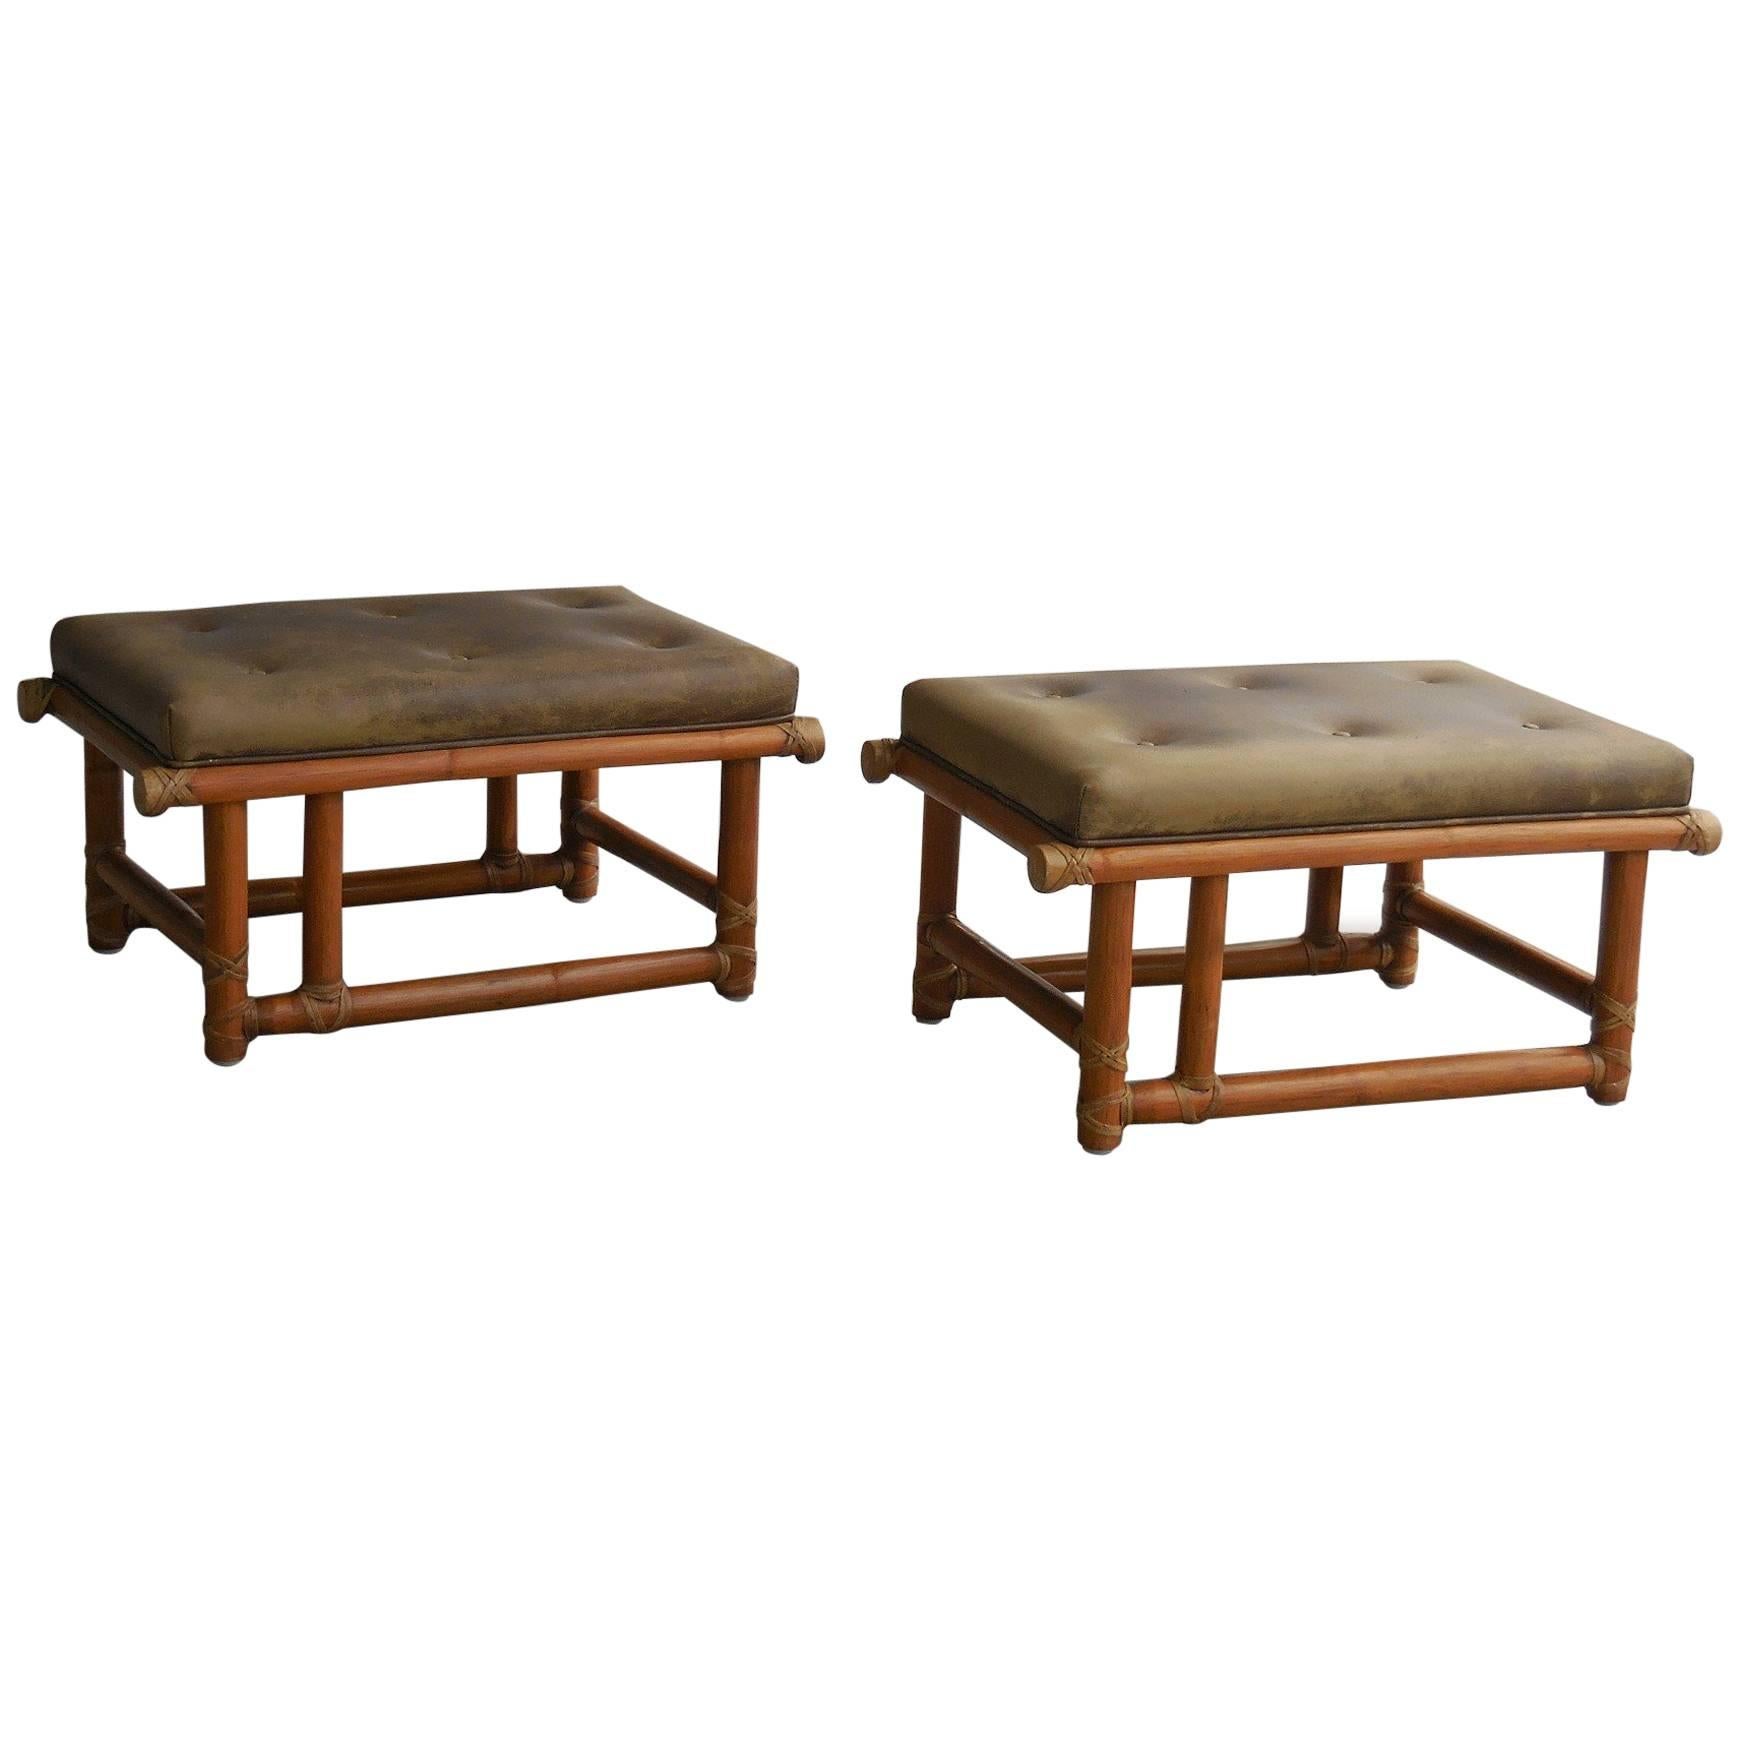 Pair of Vintage McGuire Benches or Stools